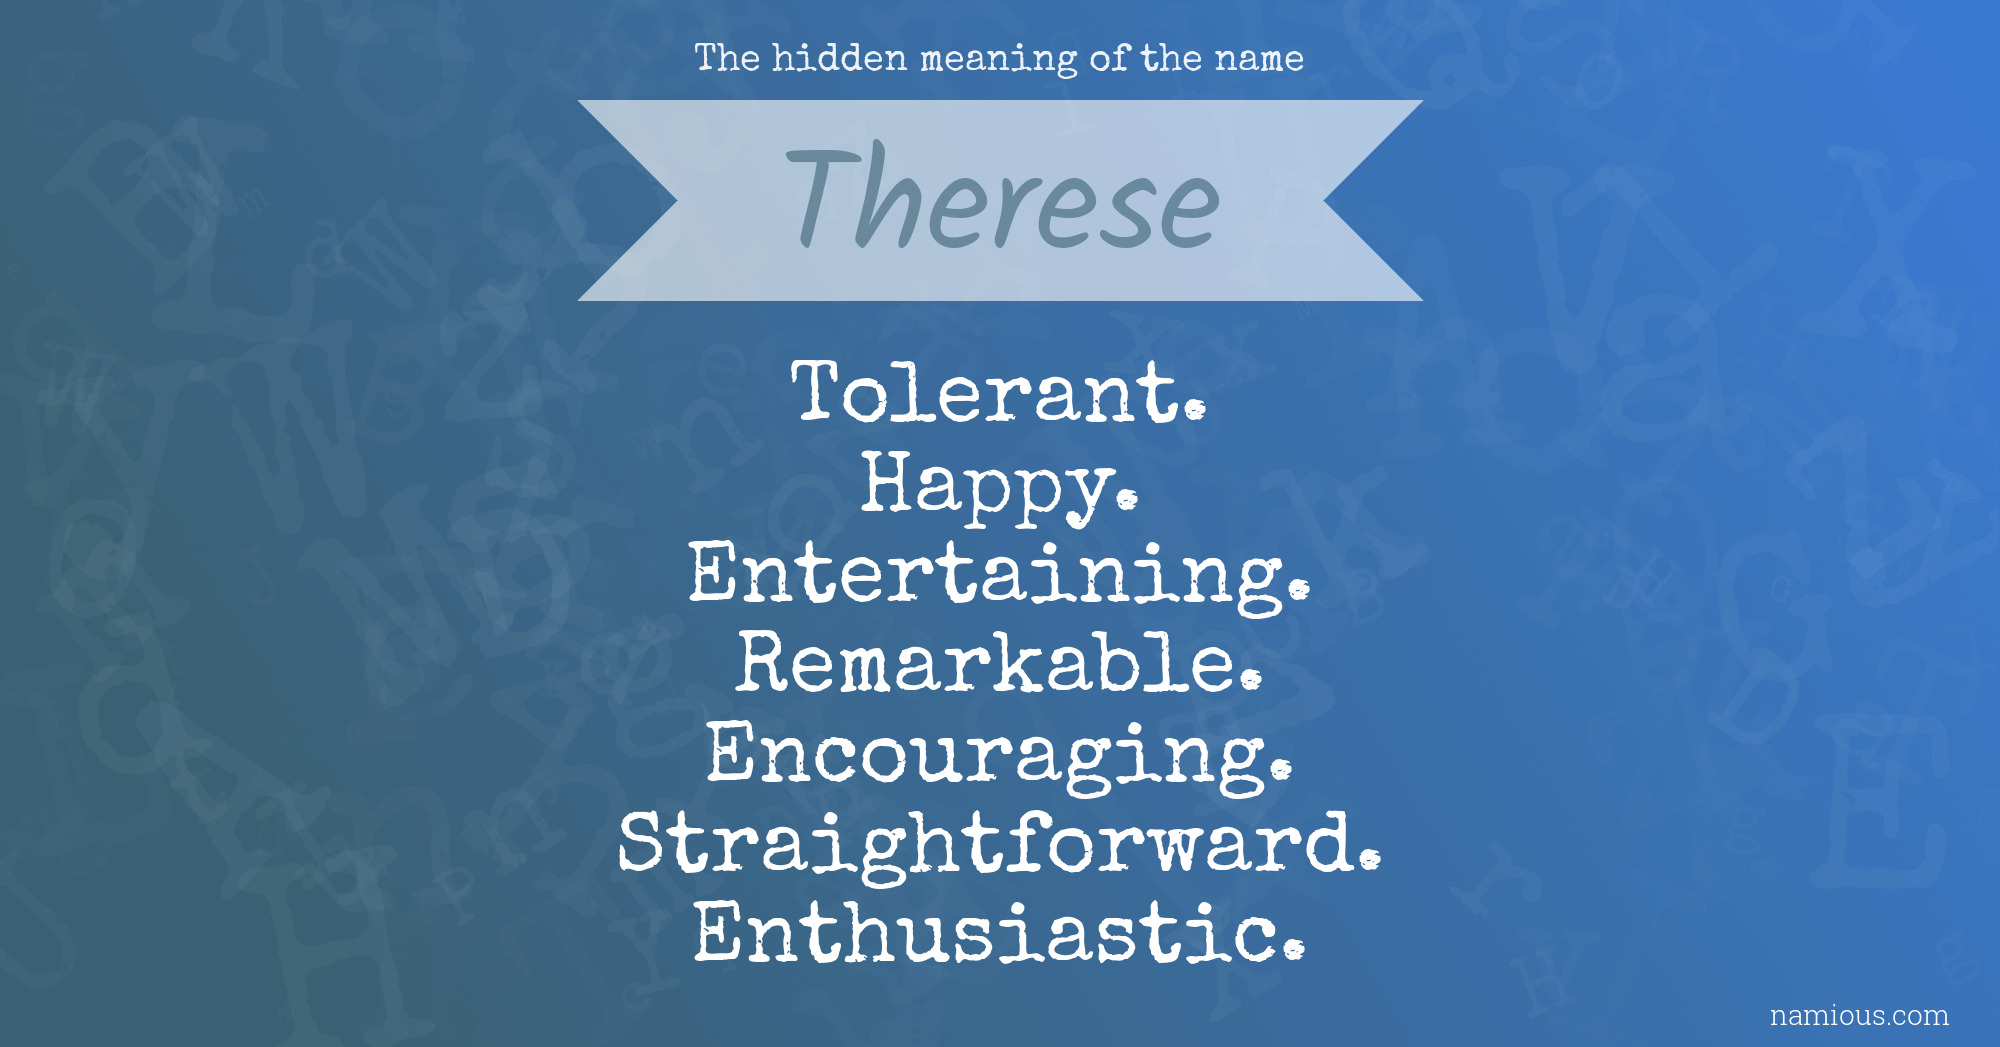 The hidden meaning of the name Therese